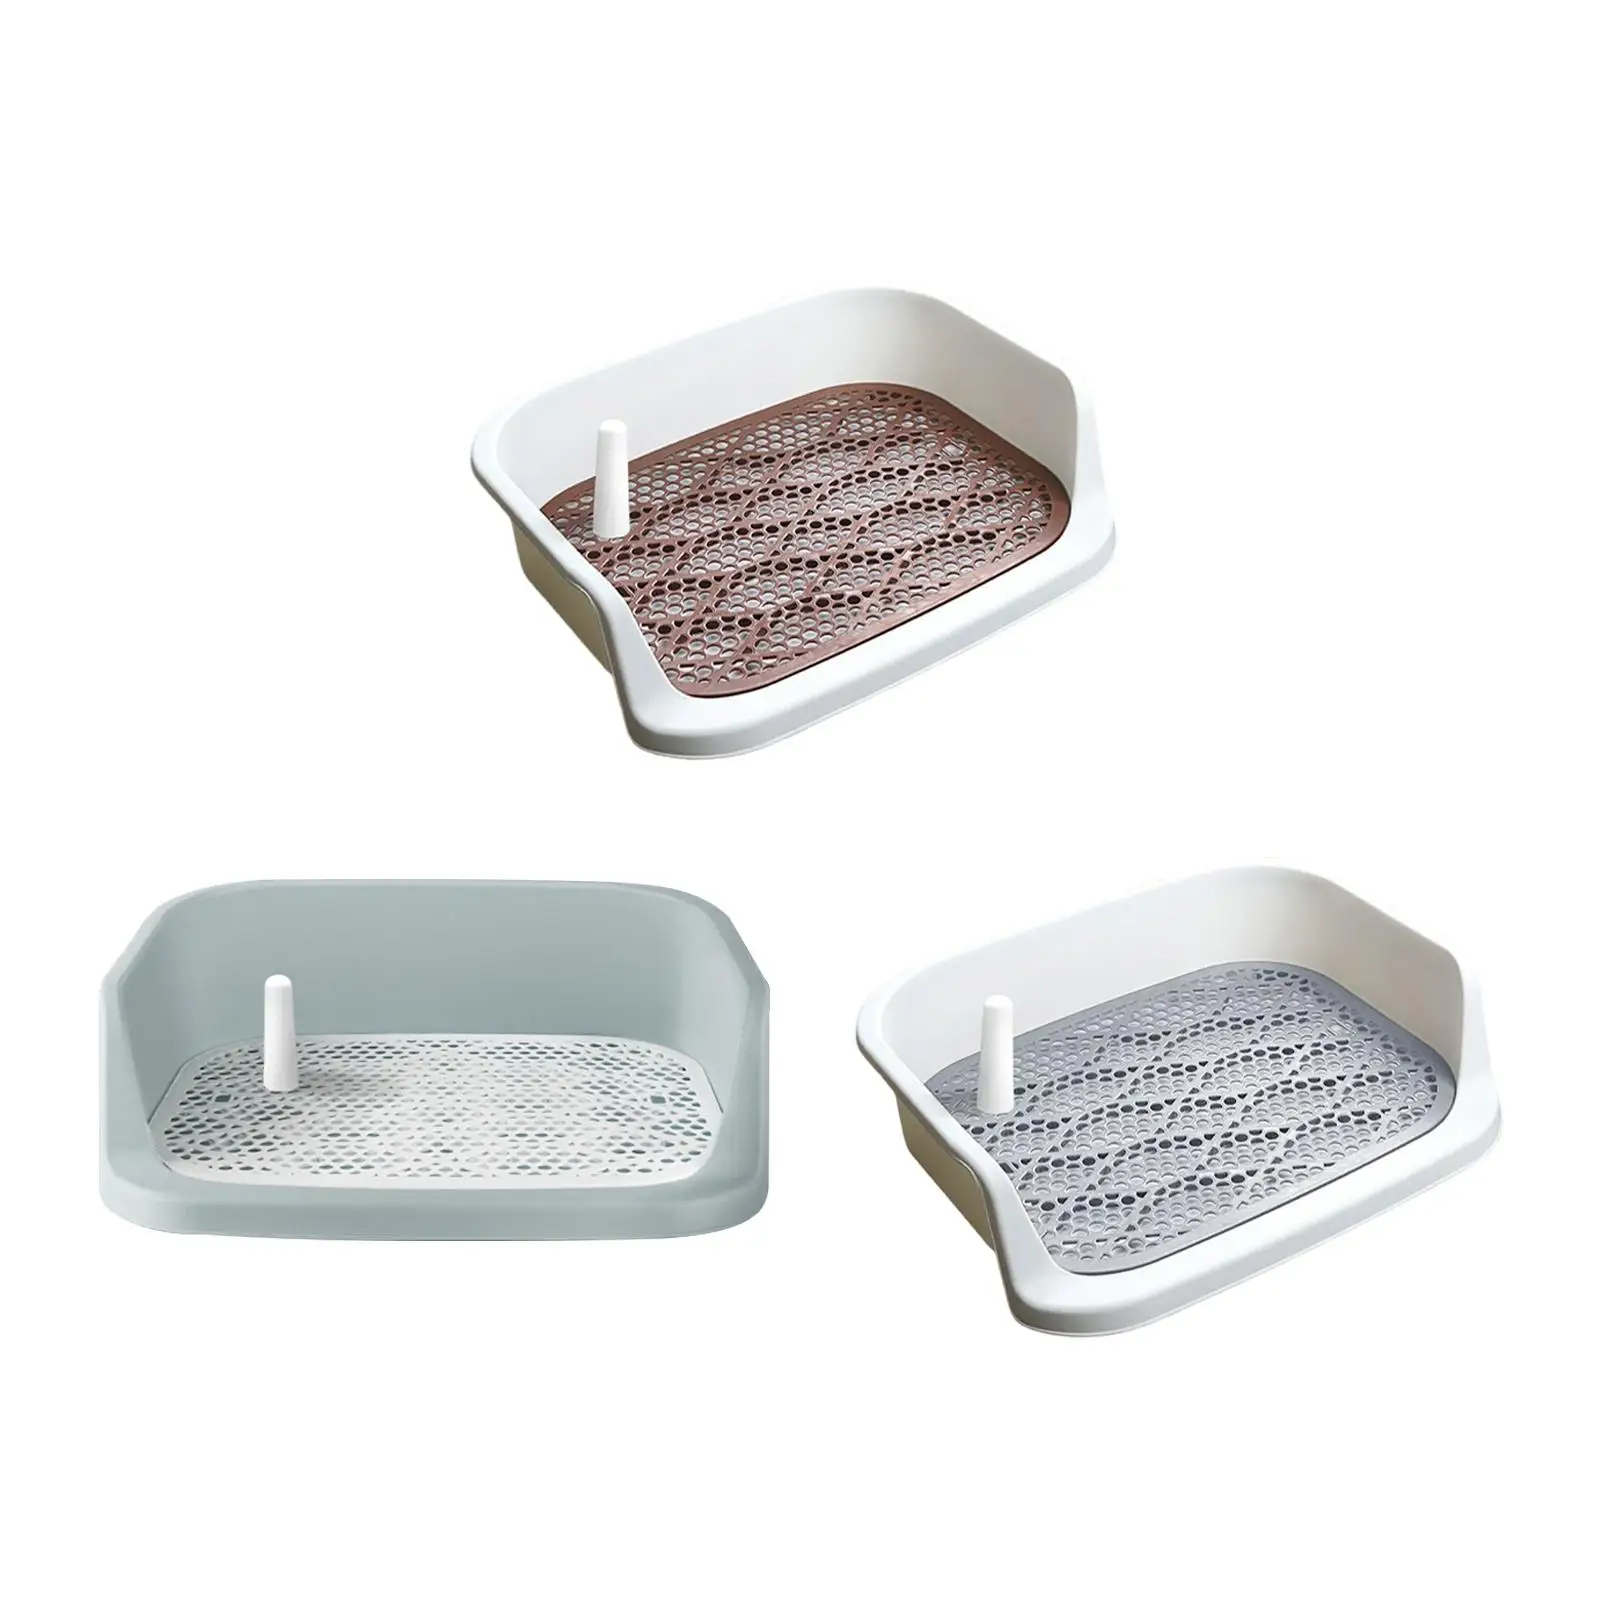 Dog Toilet Puppy Potty Tray for Cat Pet Pee Toilet Trainer Corner